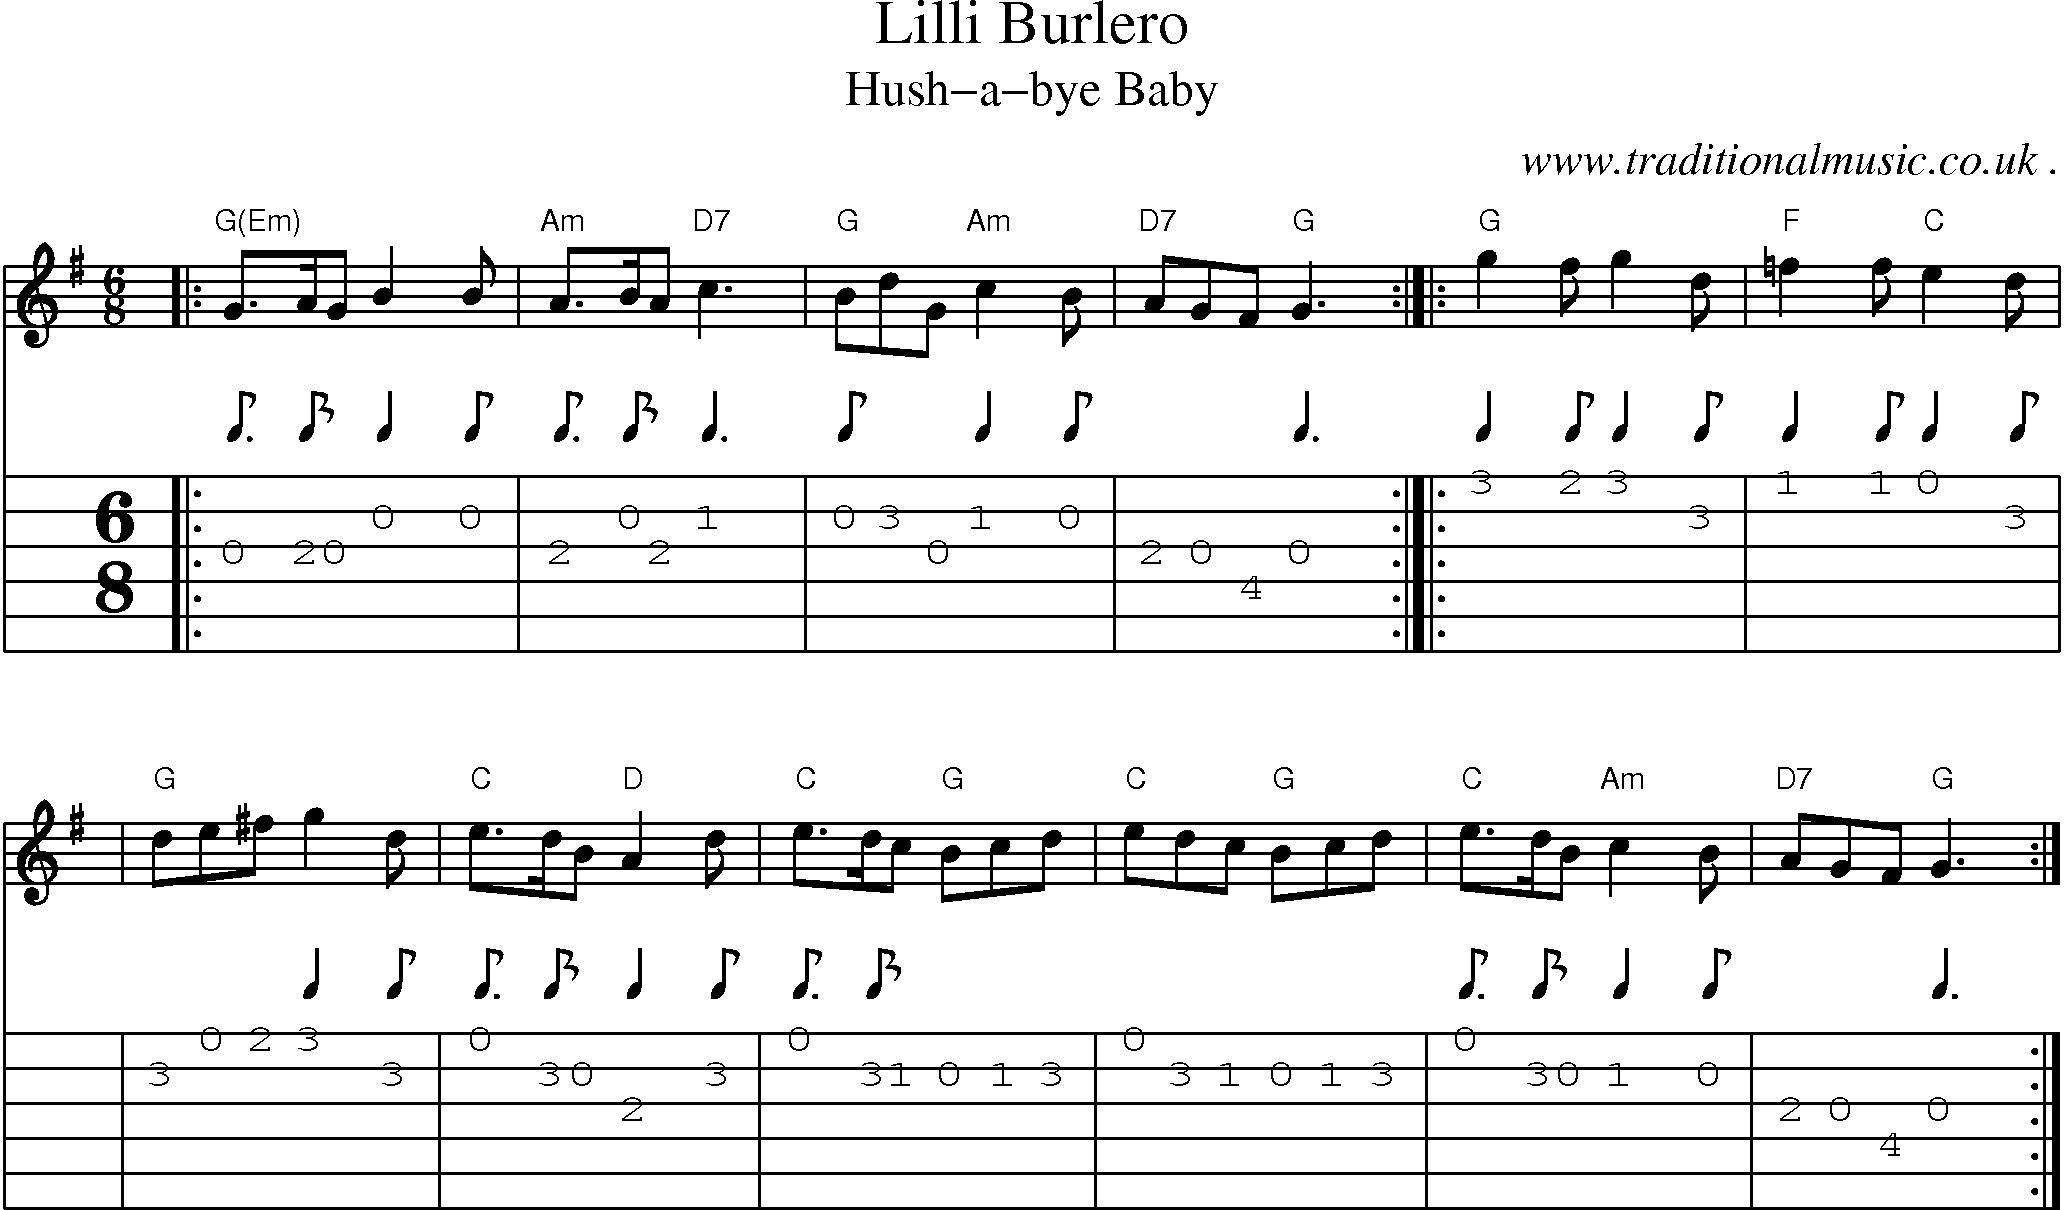 Sheet-music  score, Chords and Guitar Tabs for Lilli Burlero